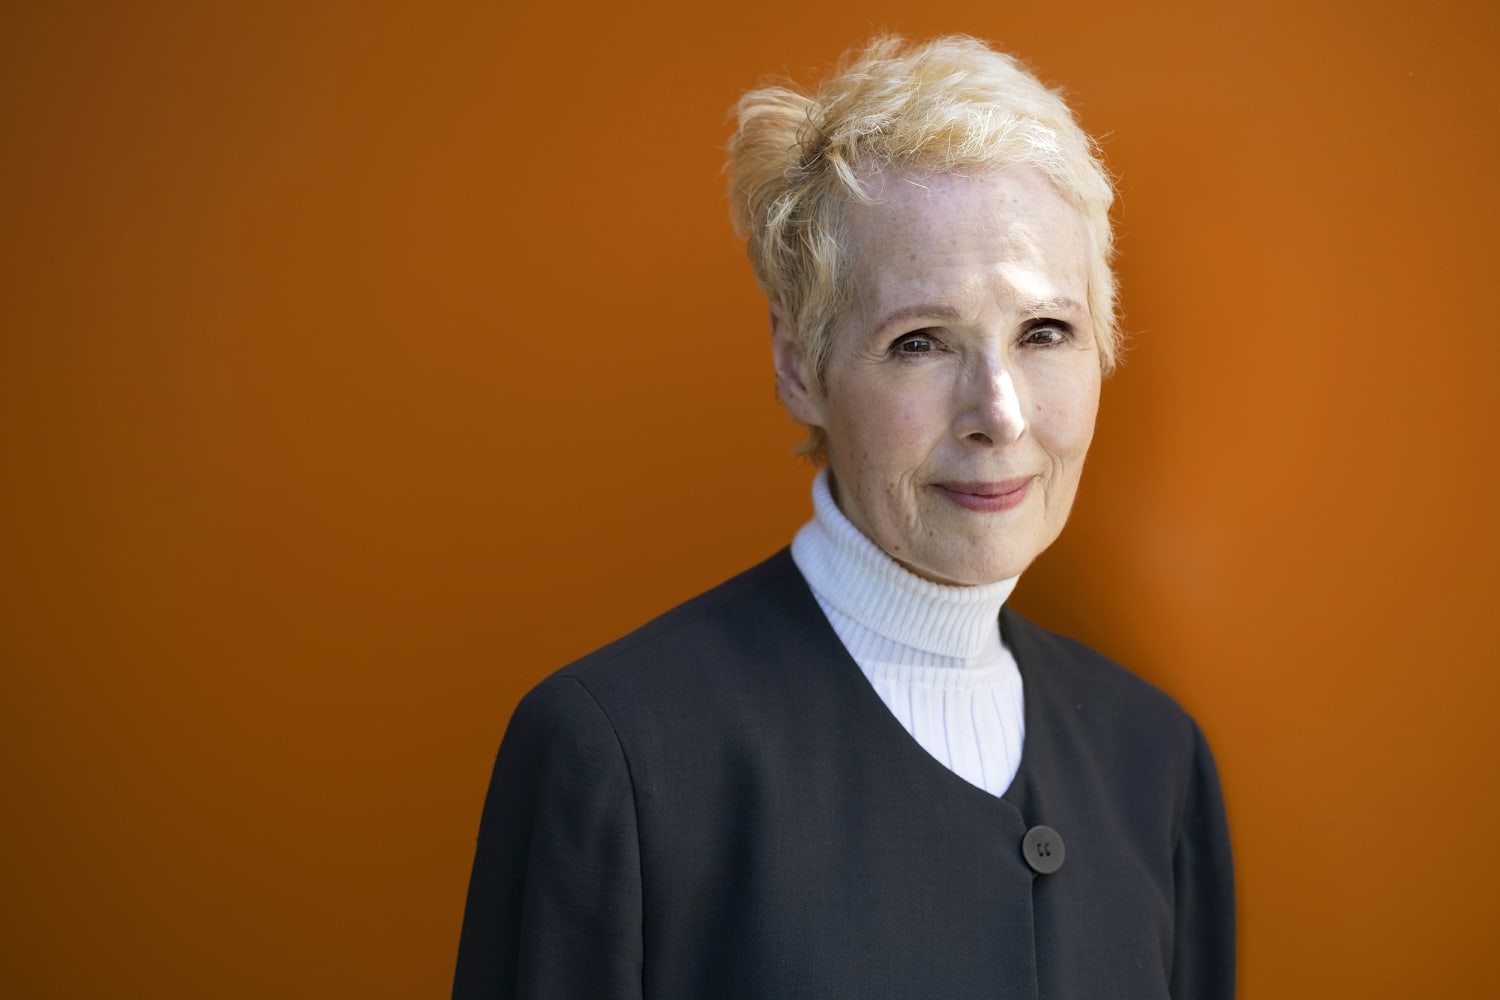 Trump mistook photo of E. Jean Carroll for ex-wife during deposition in rape allegation lawsuit